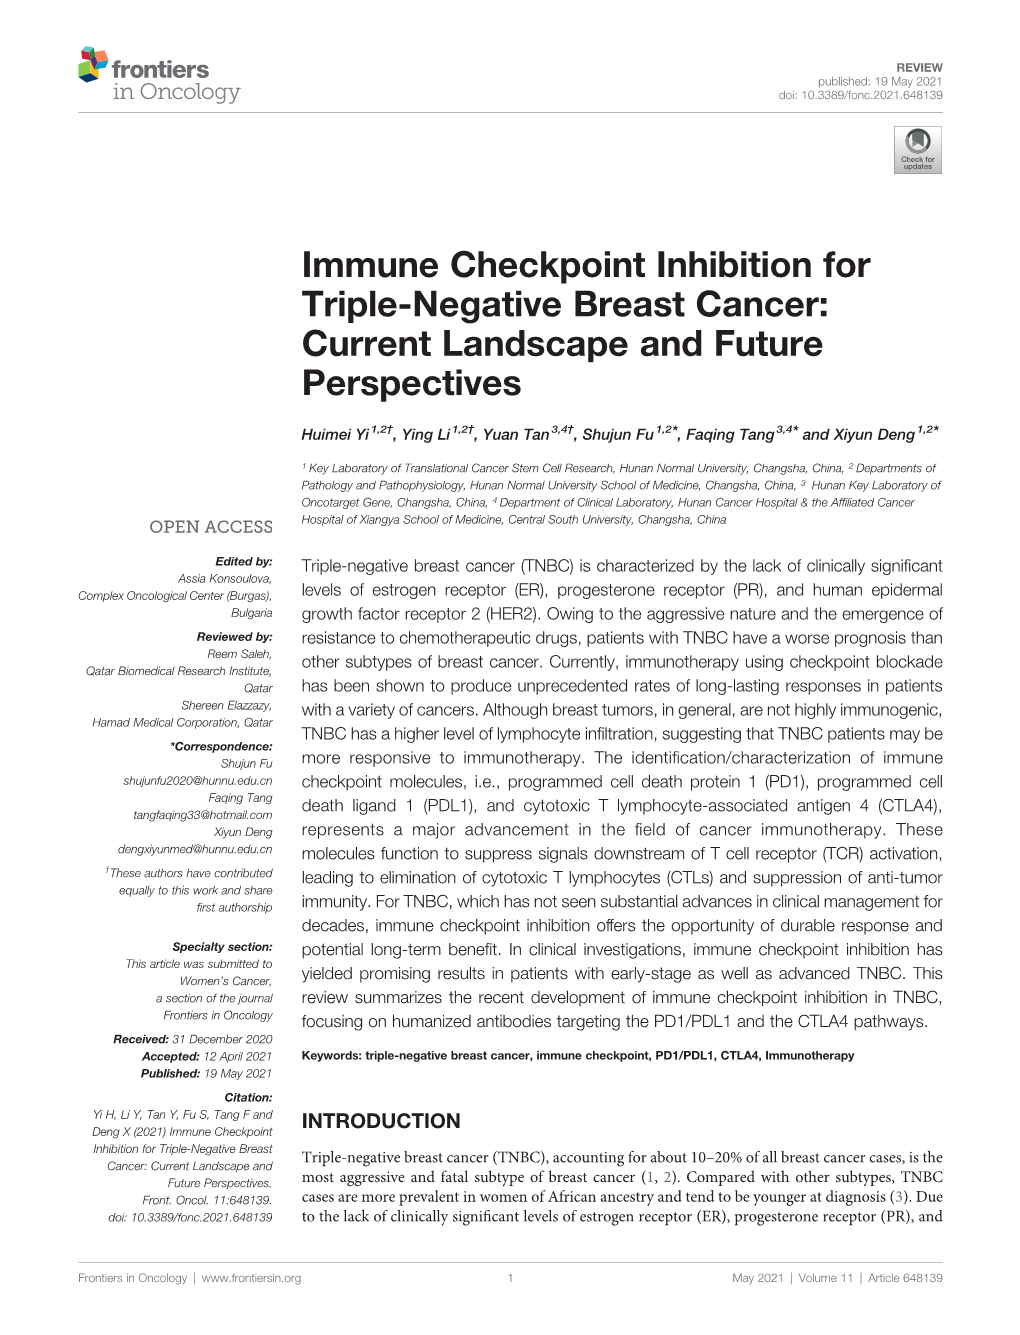 Immune Checkpoint Inhibition for Triple-Negative Breast Cancer: Current Landscape and Future Perspectives